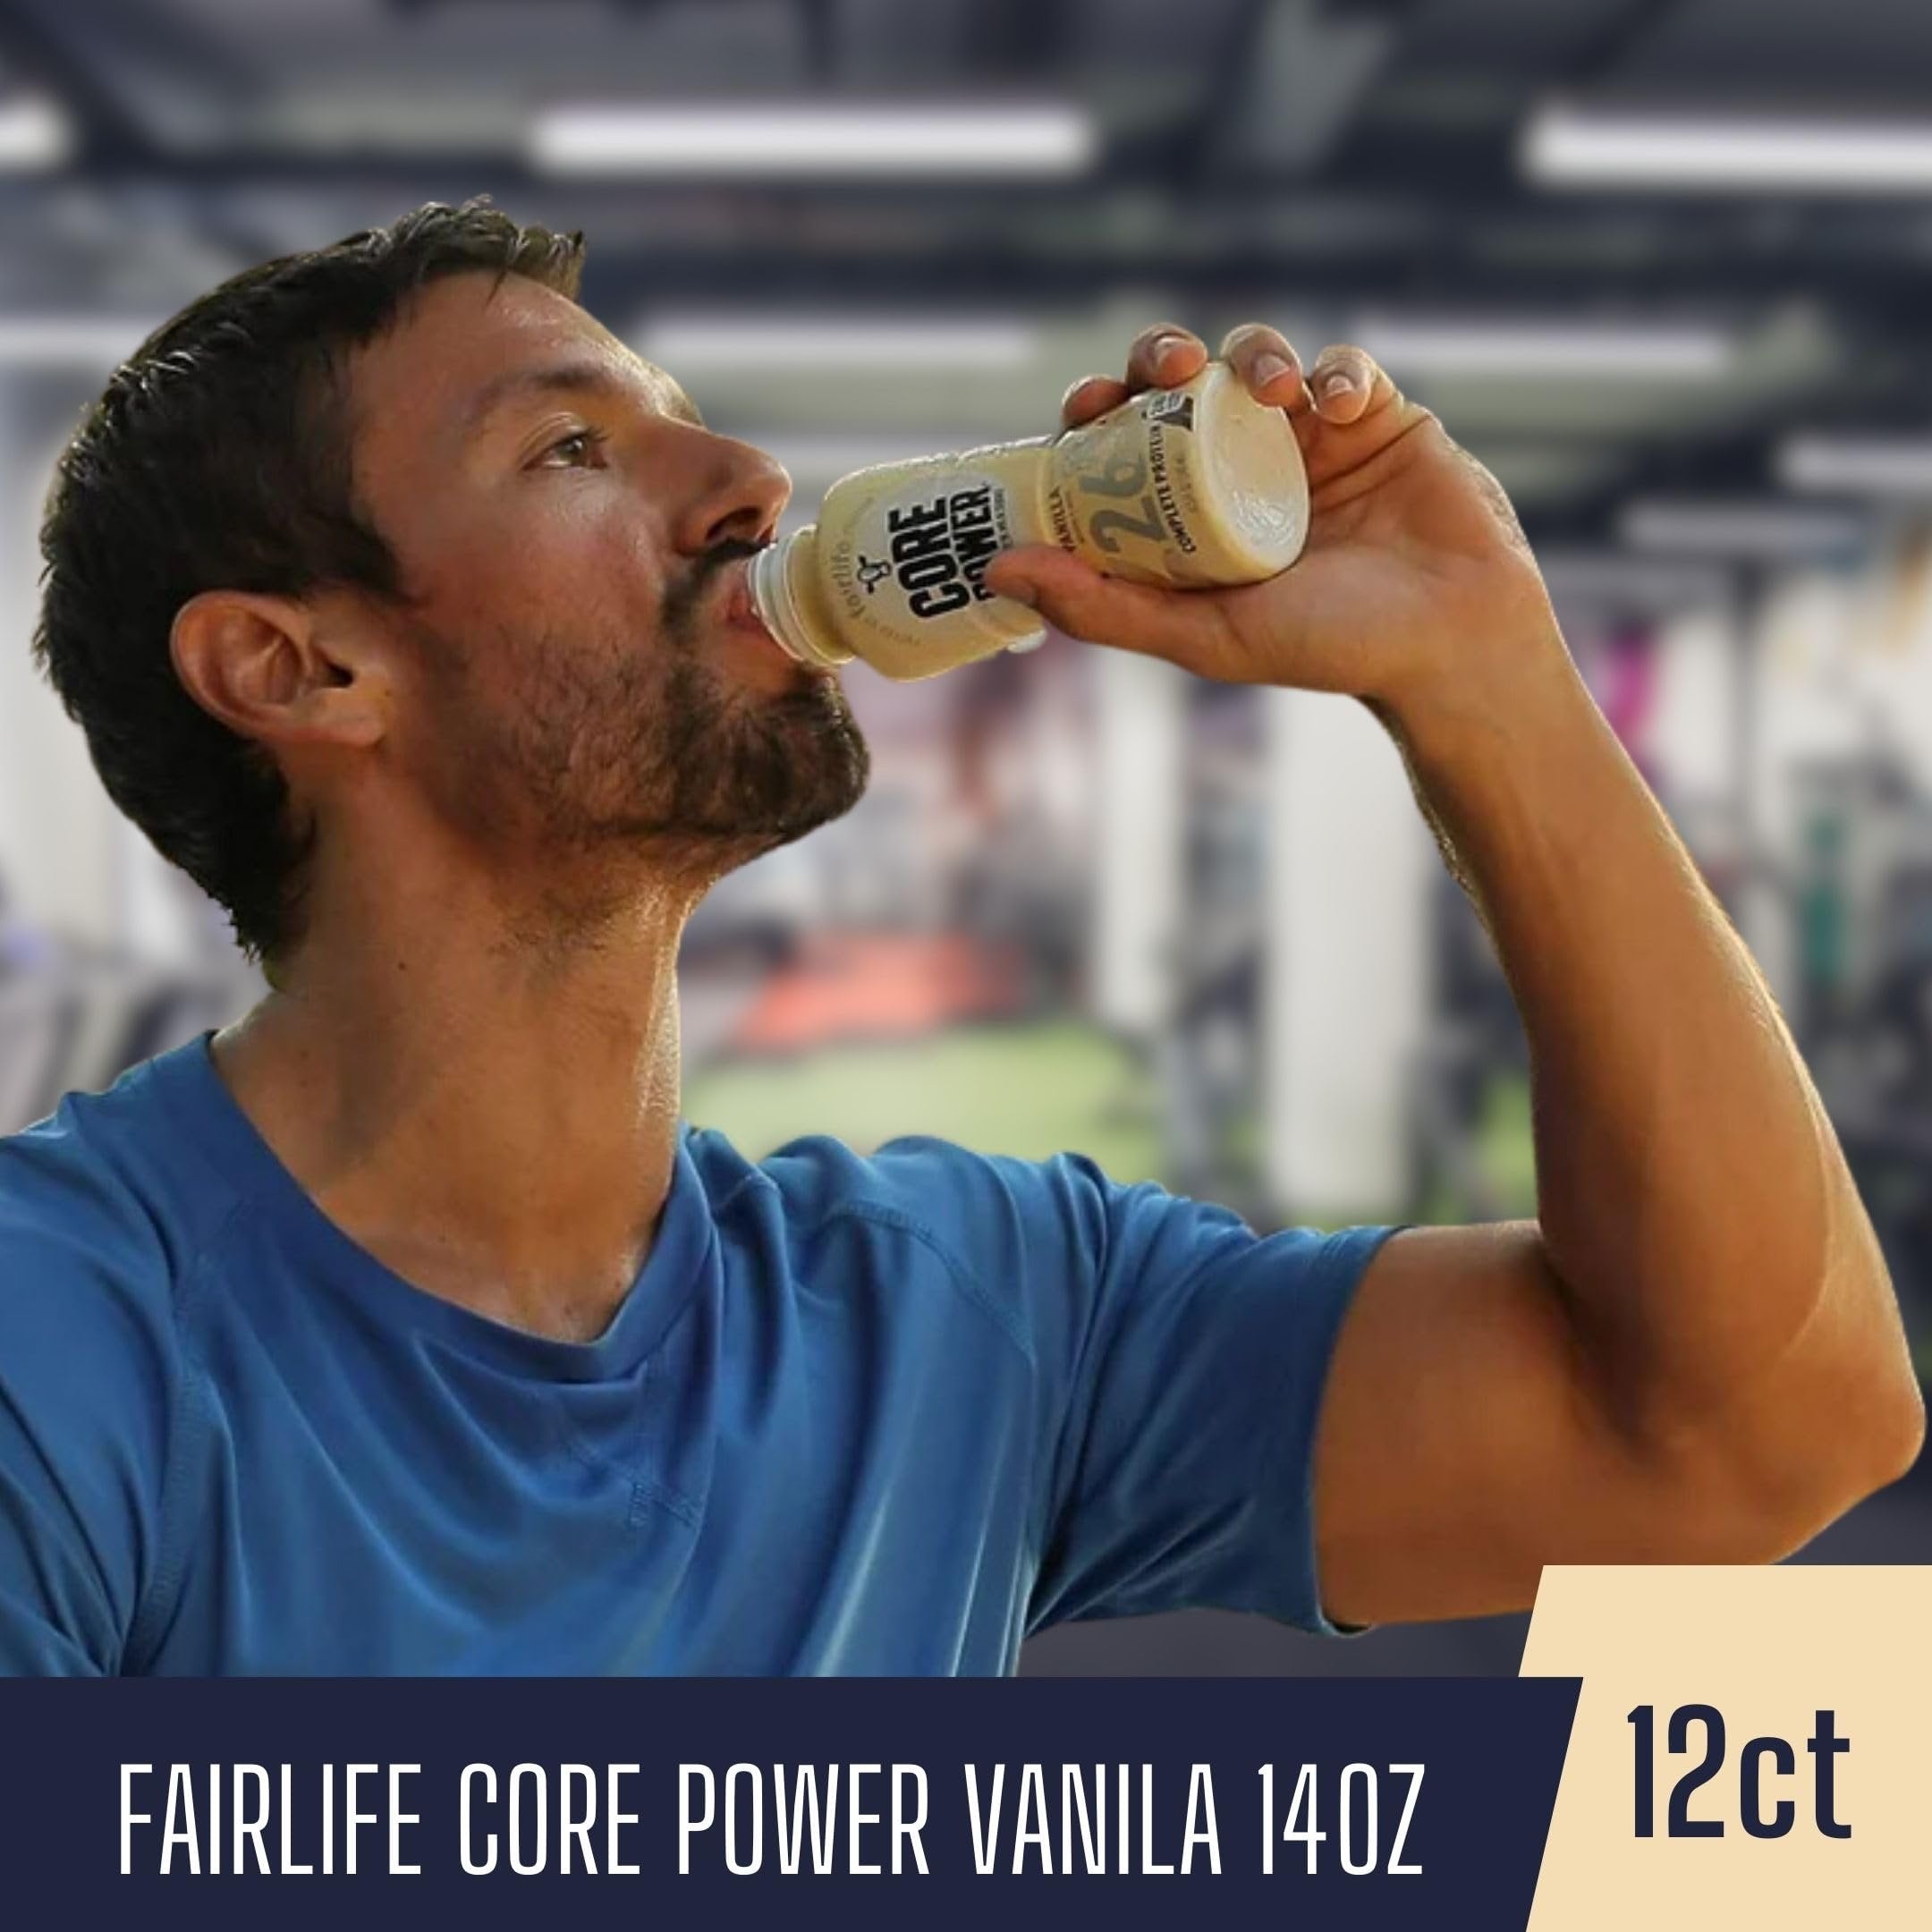 Core Power Fairlife 26g Protein Milk Shakes - Protein Shakes Ready To Drink for Workout Recovery - Vanilla, 14 Fl Oz (Pack of 12) and Multi-Purpose Key Chain